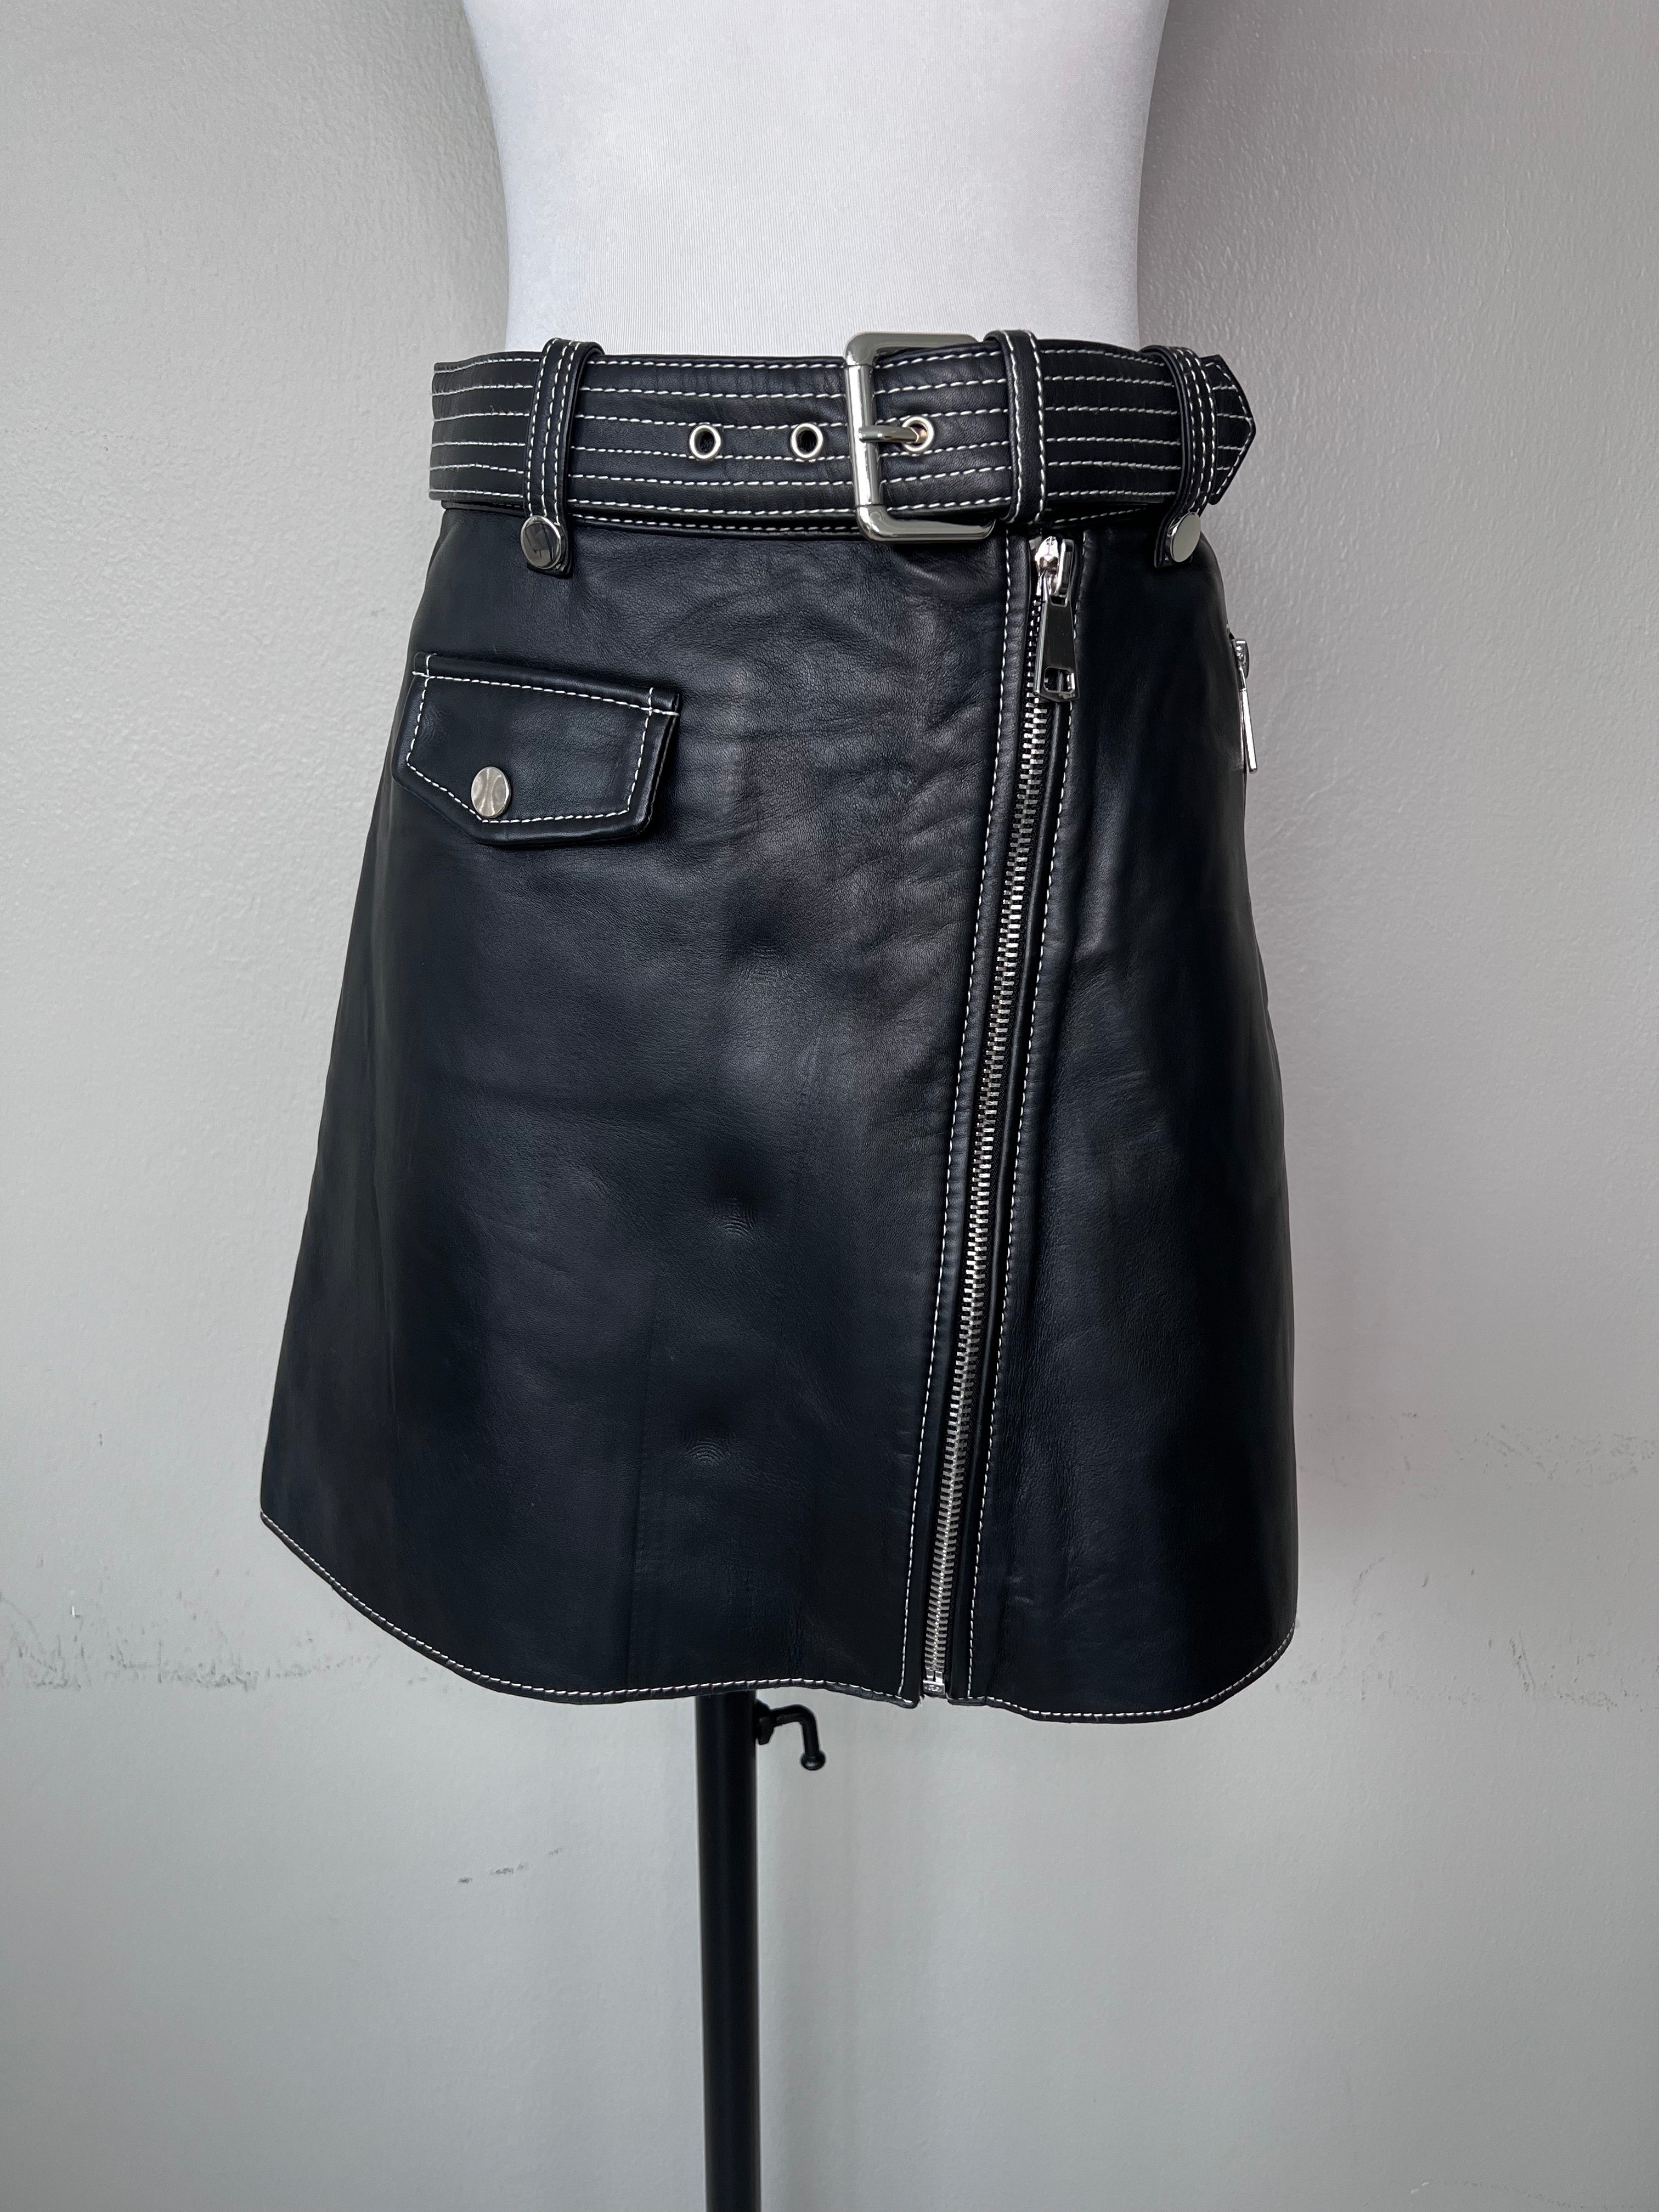 Black a-line short leather skirt with zipper down the middle and matching belt with white stitching detail. - MAJE